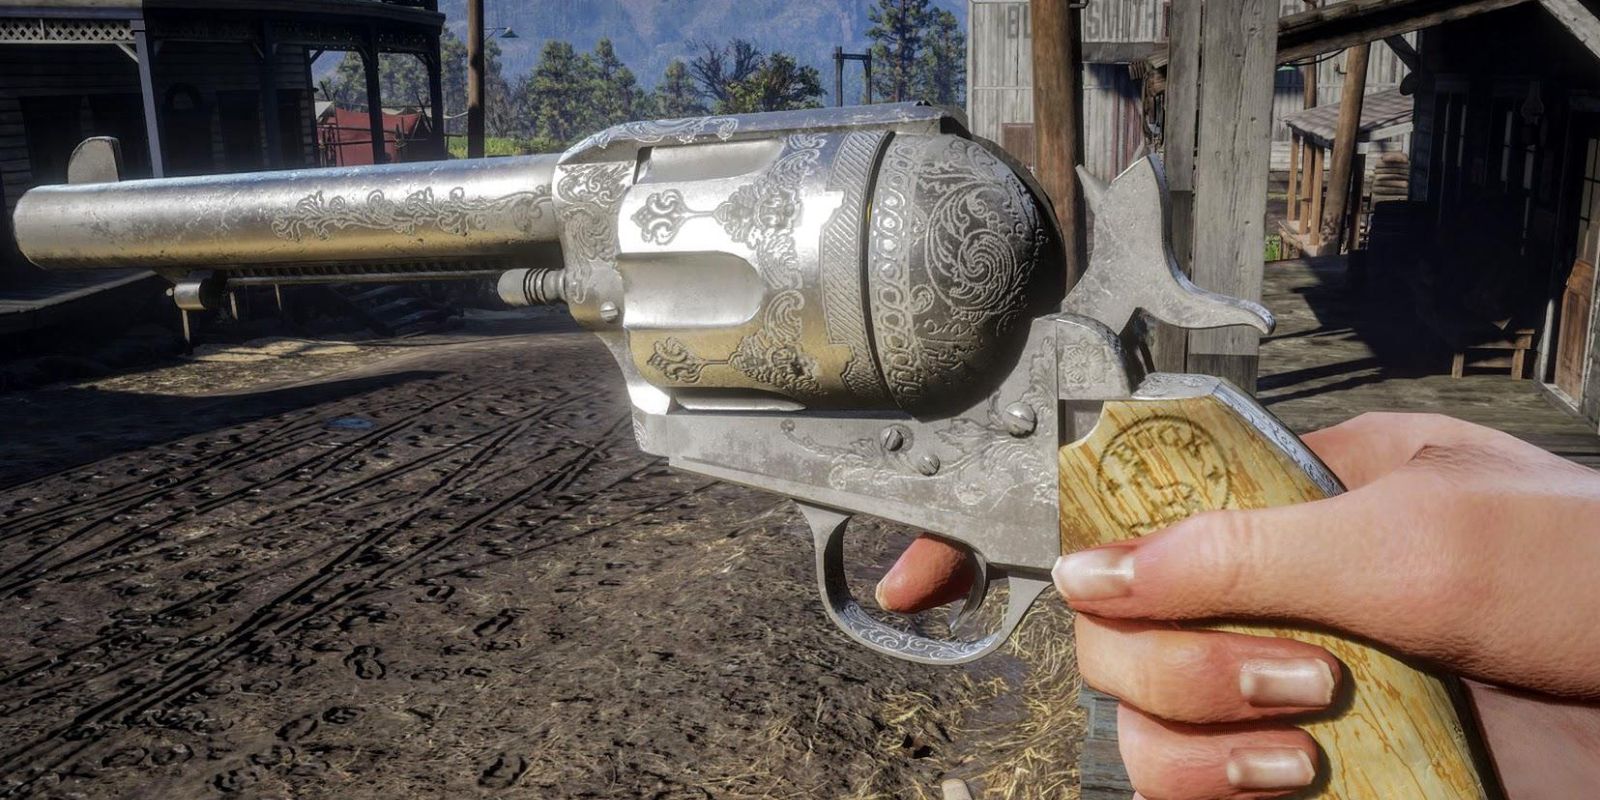 Sadie has three custom weapons in Red Dead Redemption 2 - a pair of etched Cattleman Revolvers and a wrapped Carbine Repeater